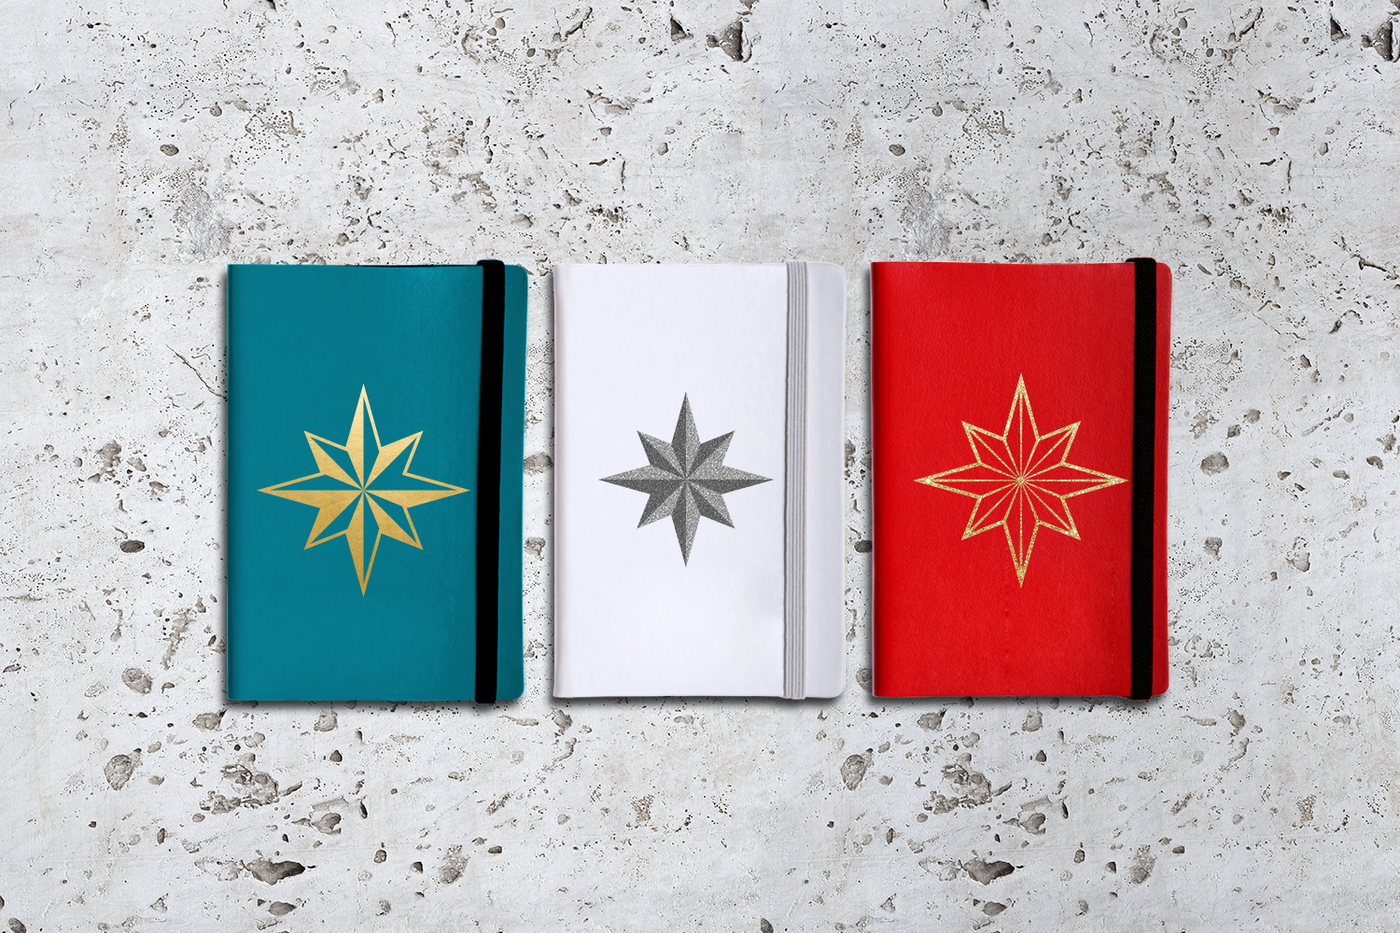 Three notebooks on a cement background. Each features an 8-pointed dimensional star design.